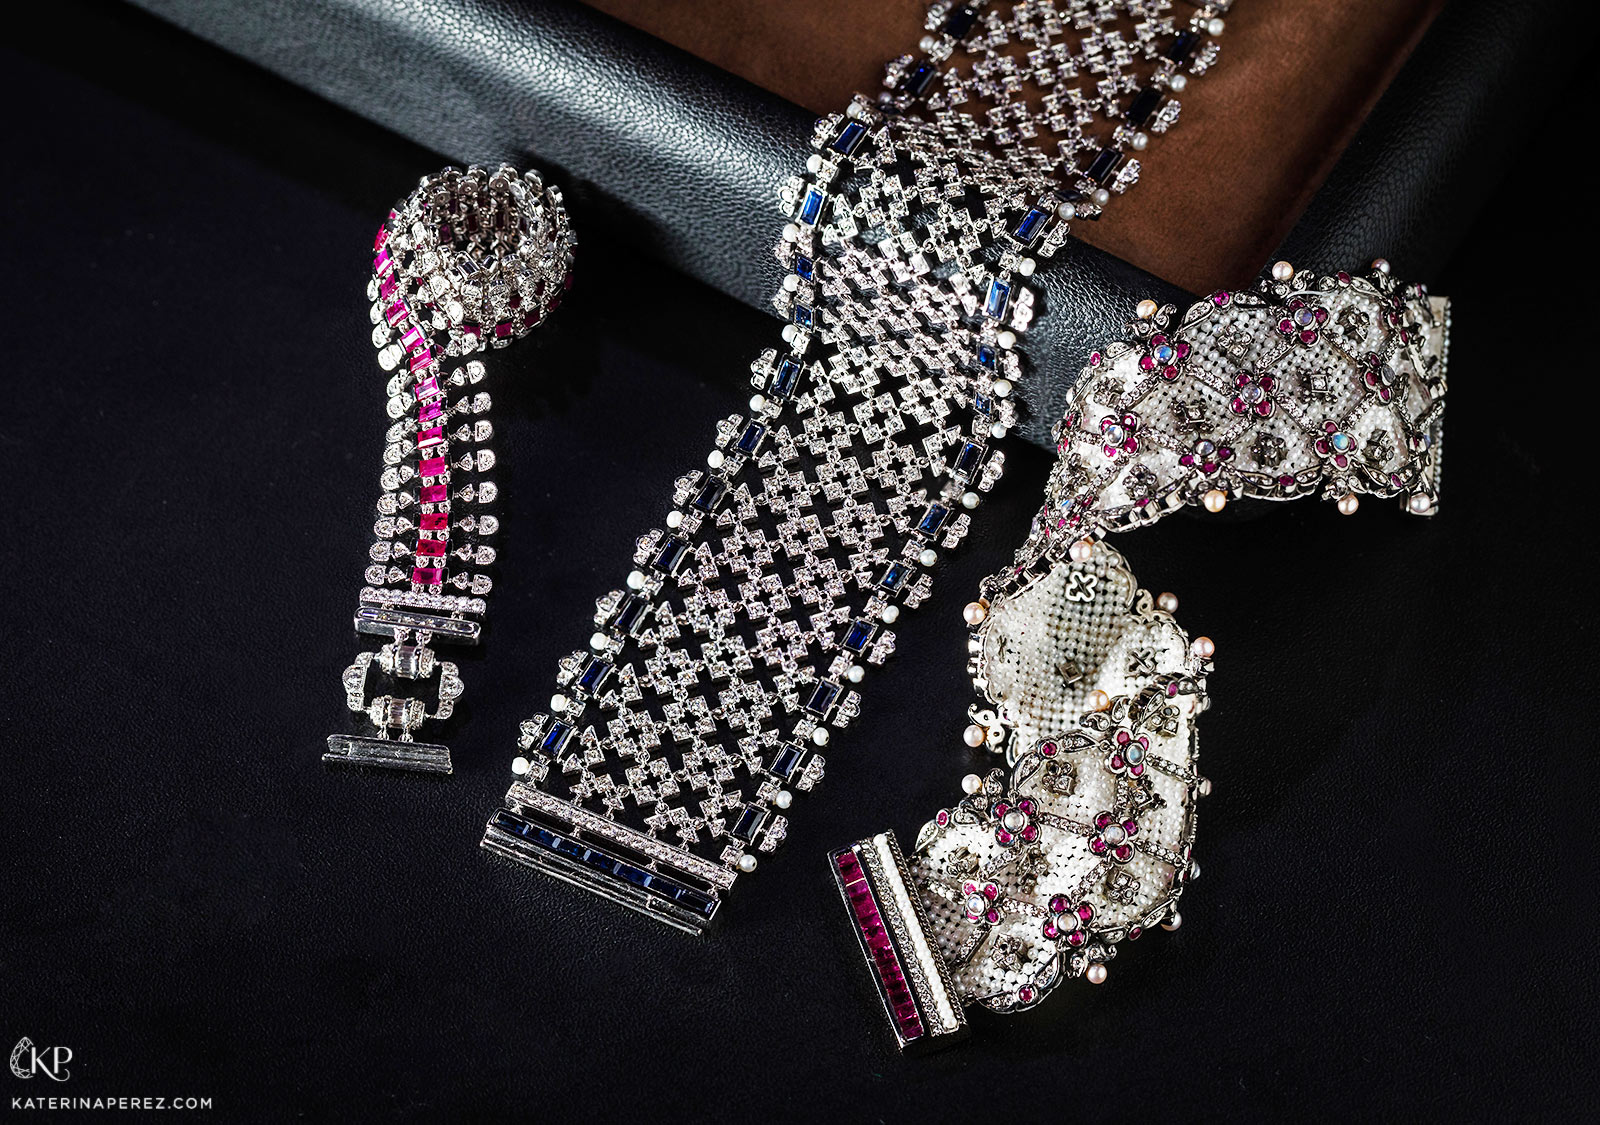 Moksh 'Empress' bracelets with keshi pearls, diamonds, sapphires and rubies in white and black gold 